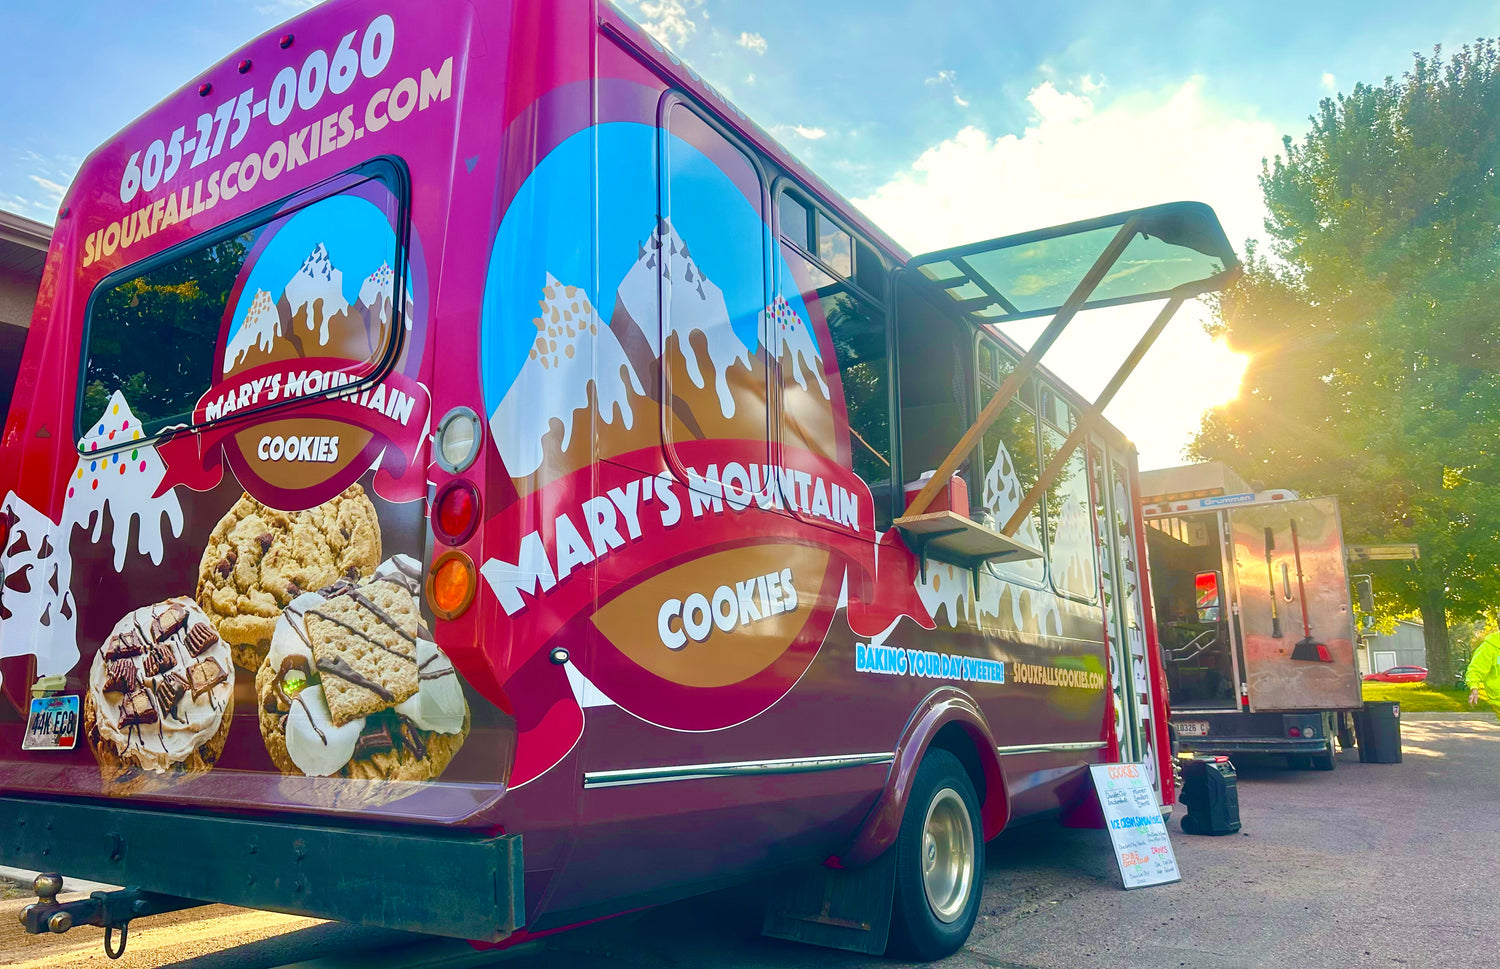 Mary's Mountain Cookies - Food Truck Cookie Bus